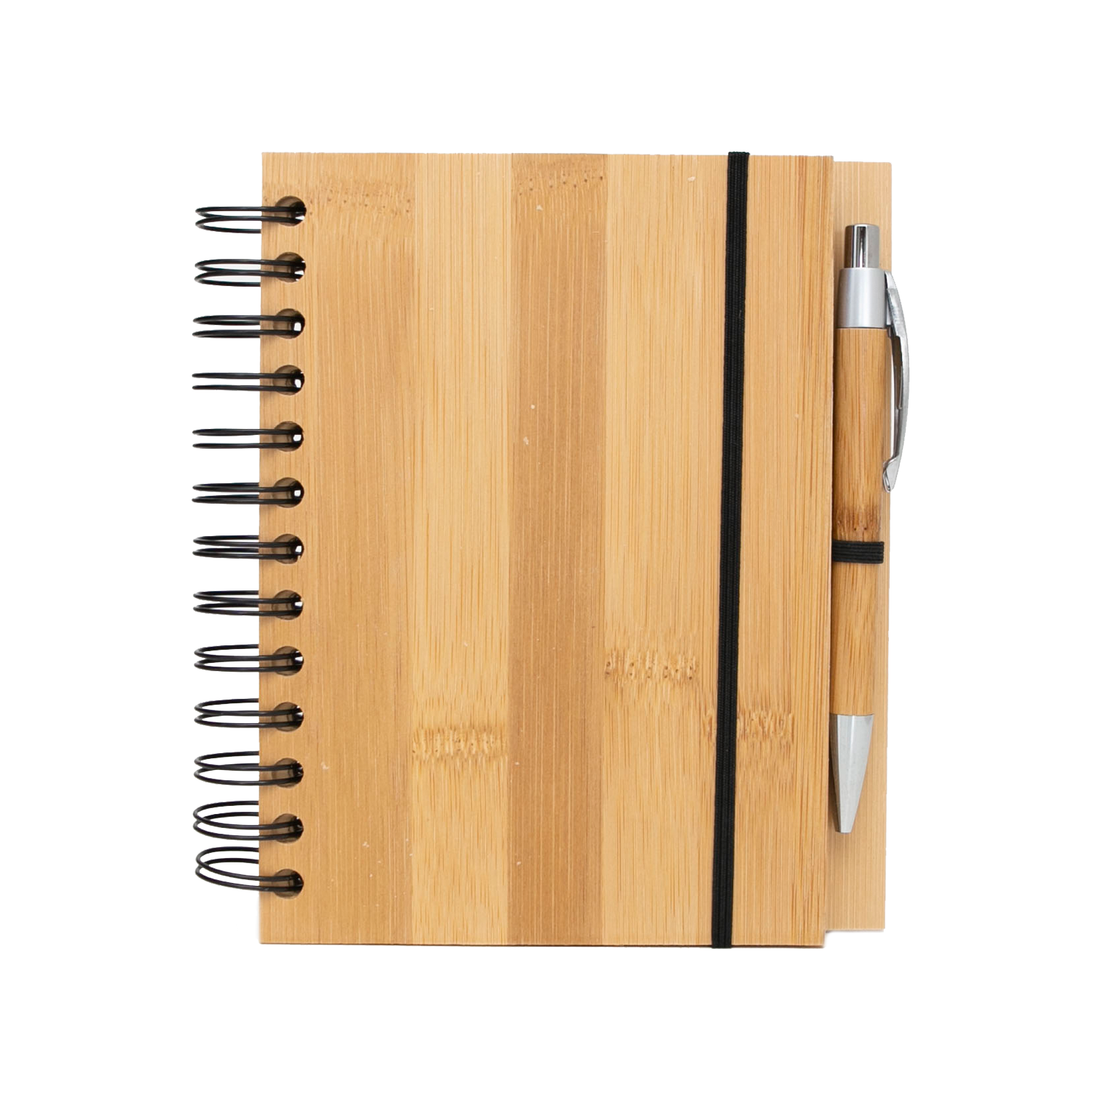 Wood Life Notebook and Pen Set